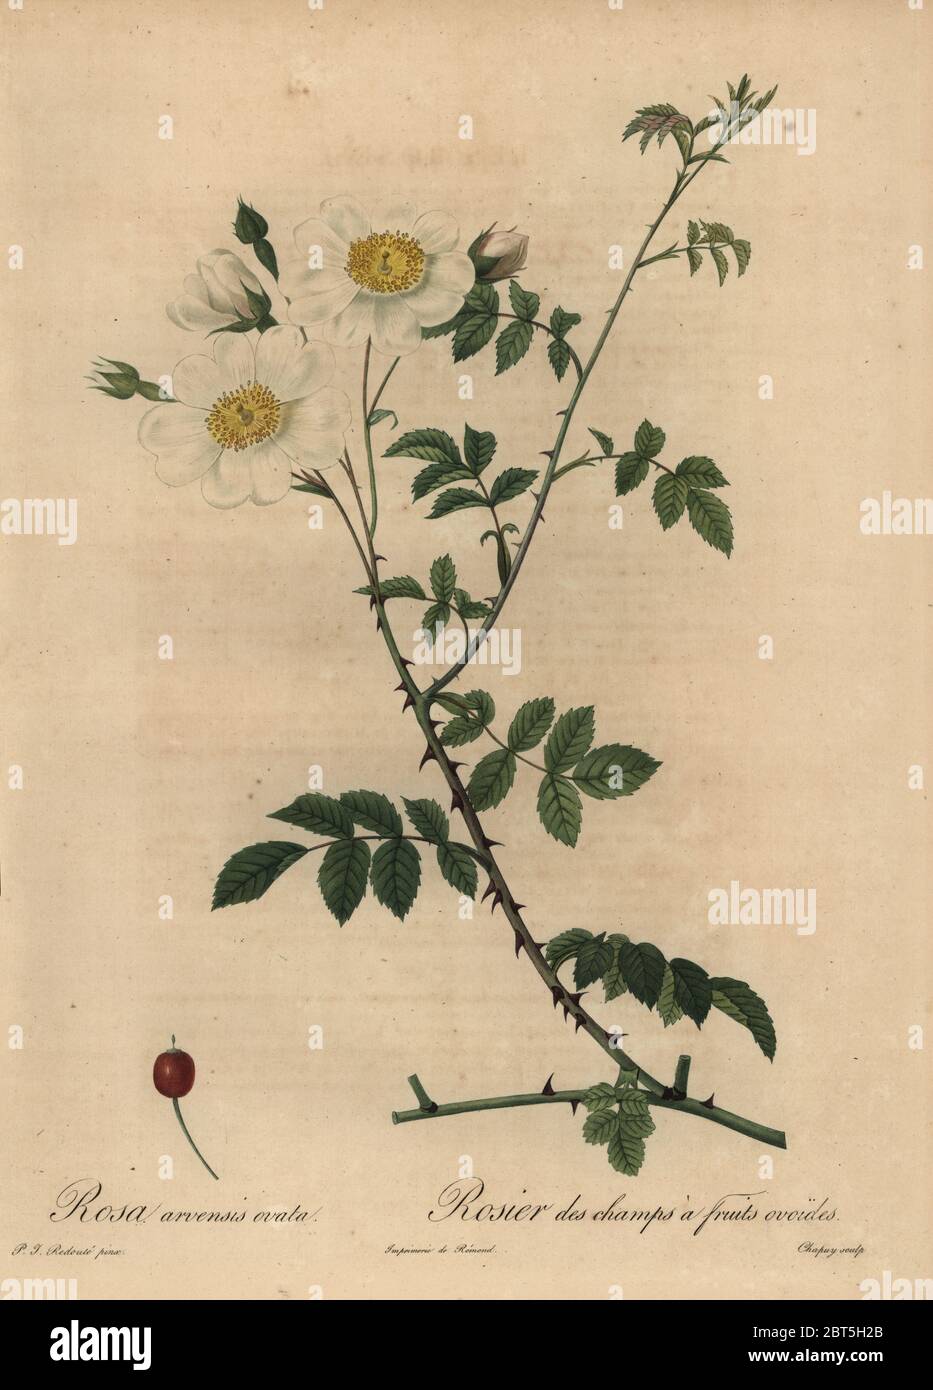 White field rose, Rosa arvensis ovata, Rosier des champs a fruits ovoides. Stipple copperplate engraving by Jean Baptiste Chapuy handcoloured a la poupee after a botanical illustration by Pierre-Joseph Redoute from the first folio edition of Les Roses, Firmin Didot, Paris, 1817. Stock Photo